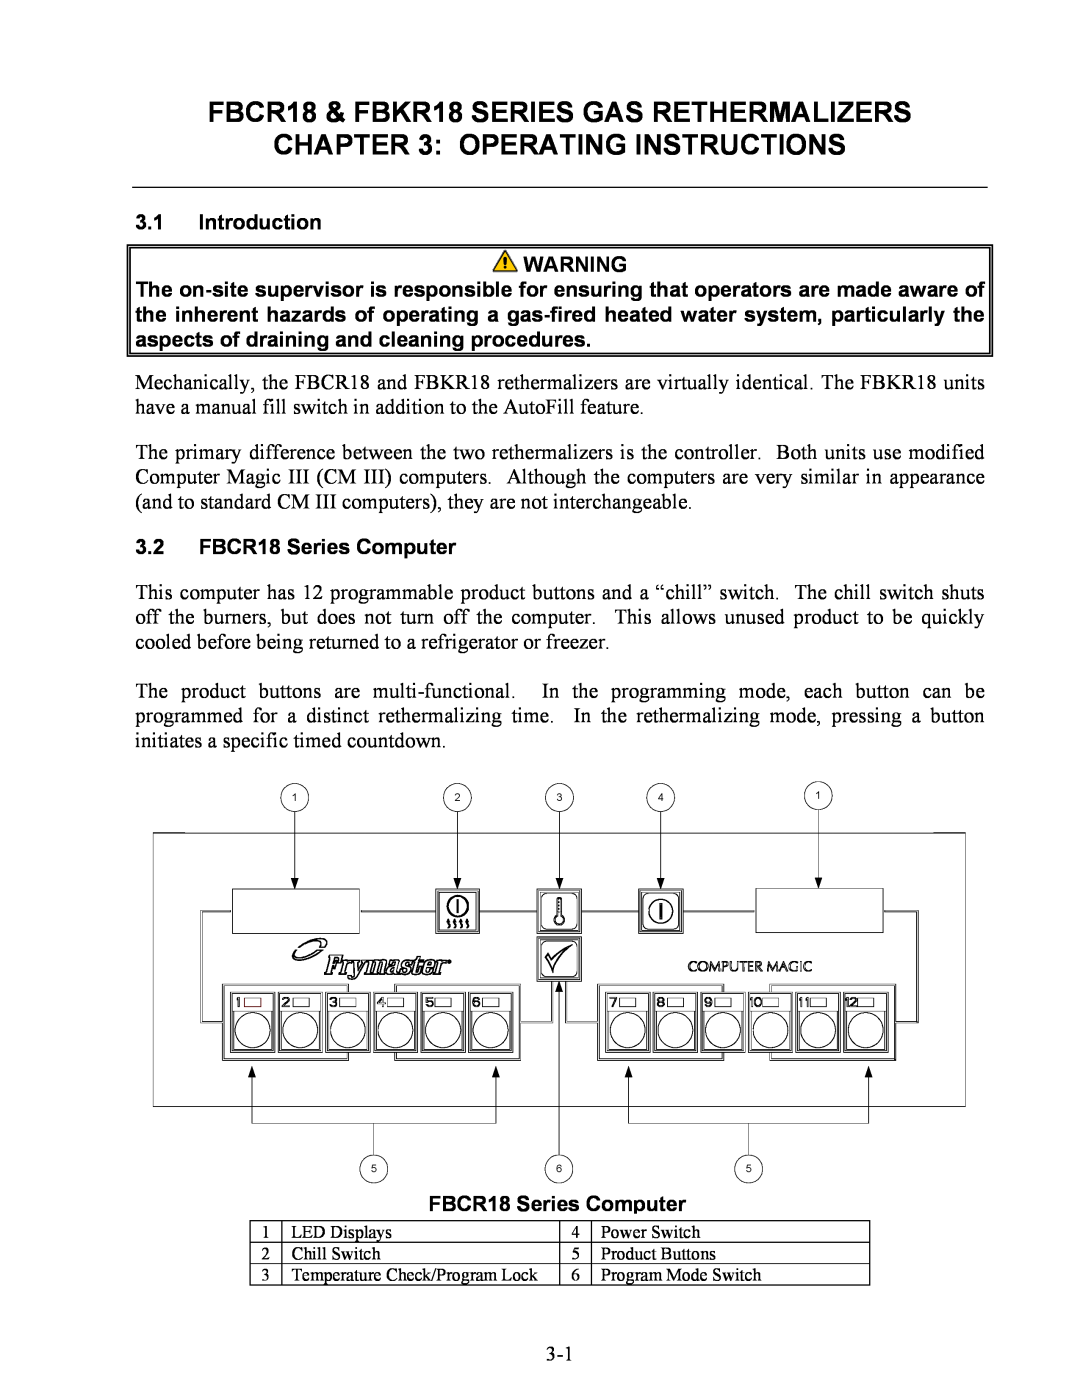 Frymaster FBKR18 Series manual Operating Instructions, Introduction, FBCR18 Series Computer 